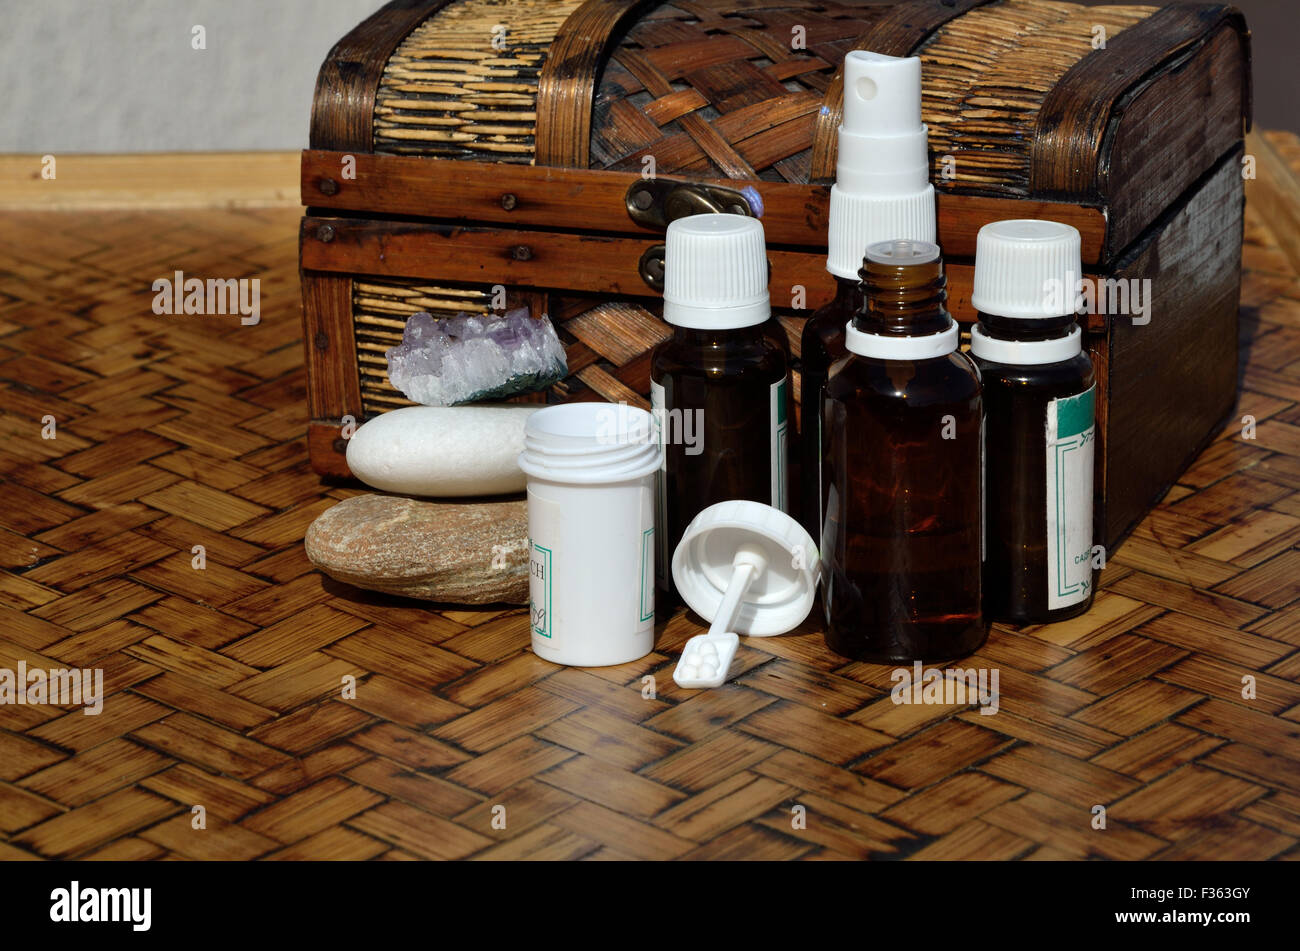 Chest, bottles and containers of homeopathic remedies and stones Stock Photo